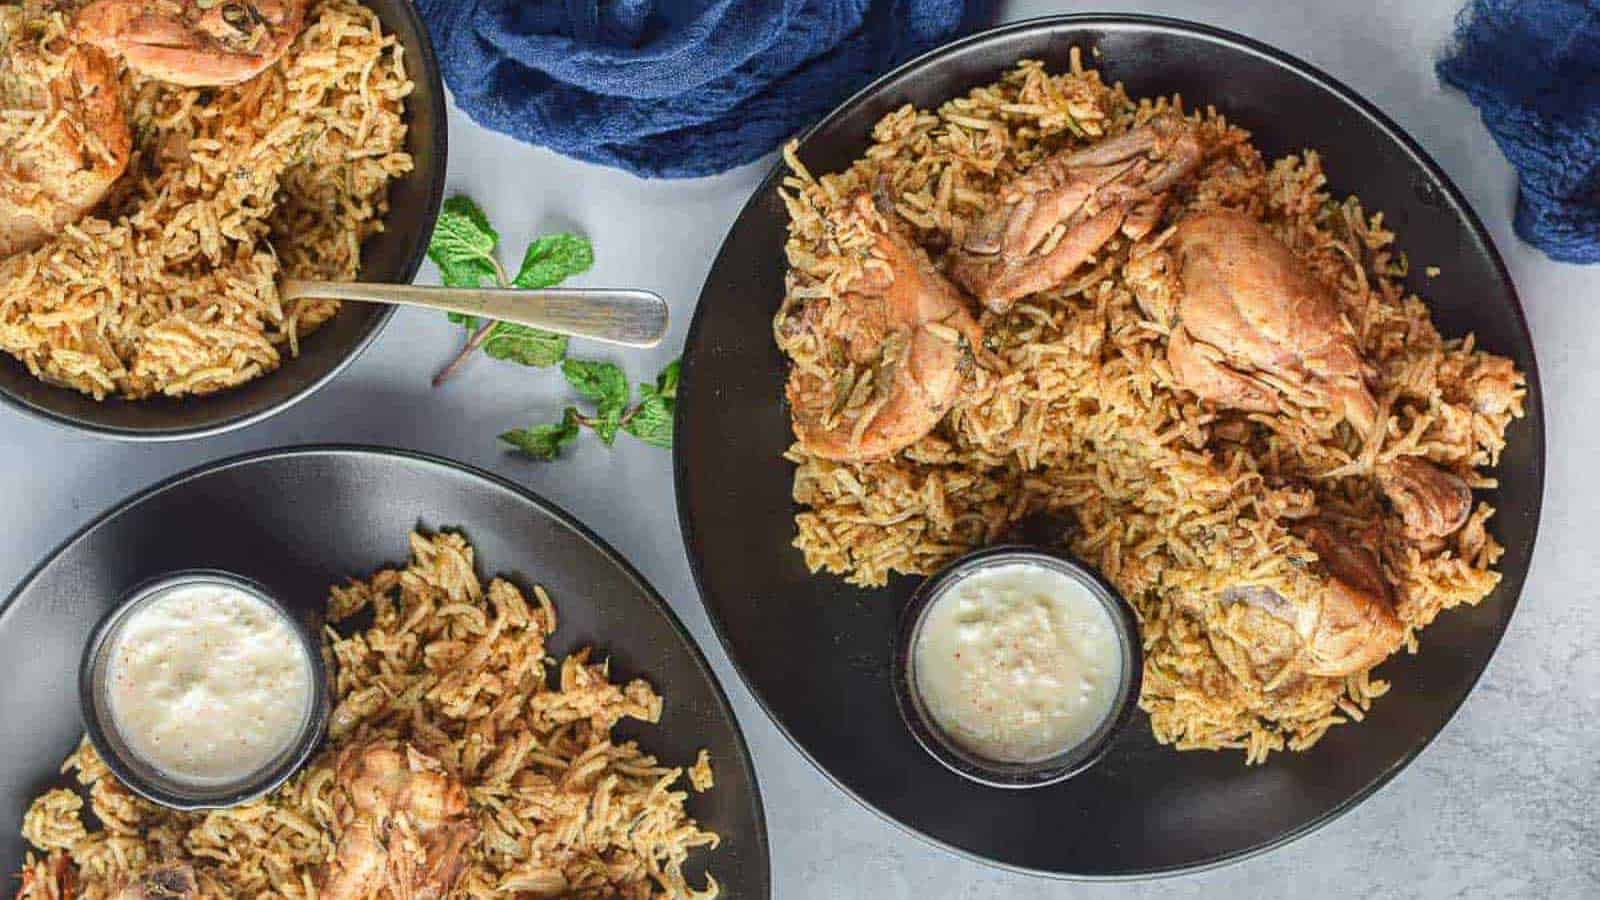 <p>Instant Pot Chicken Biryani, anyone? It’s the fusion of exotic spices, tender chicken, and perfectly cooked rice in a handy instant pot. Here’s to an unforgettable meal that keeps you coming back for more!<br><strong>Get the Recipe: </strong><a href="https://allwaysdelicious.com/instant-pot-biryani/?utm_source=msn&utm_medium=page&utm_campaign=msn">Instant Pot Chicken Biryani</a></p>